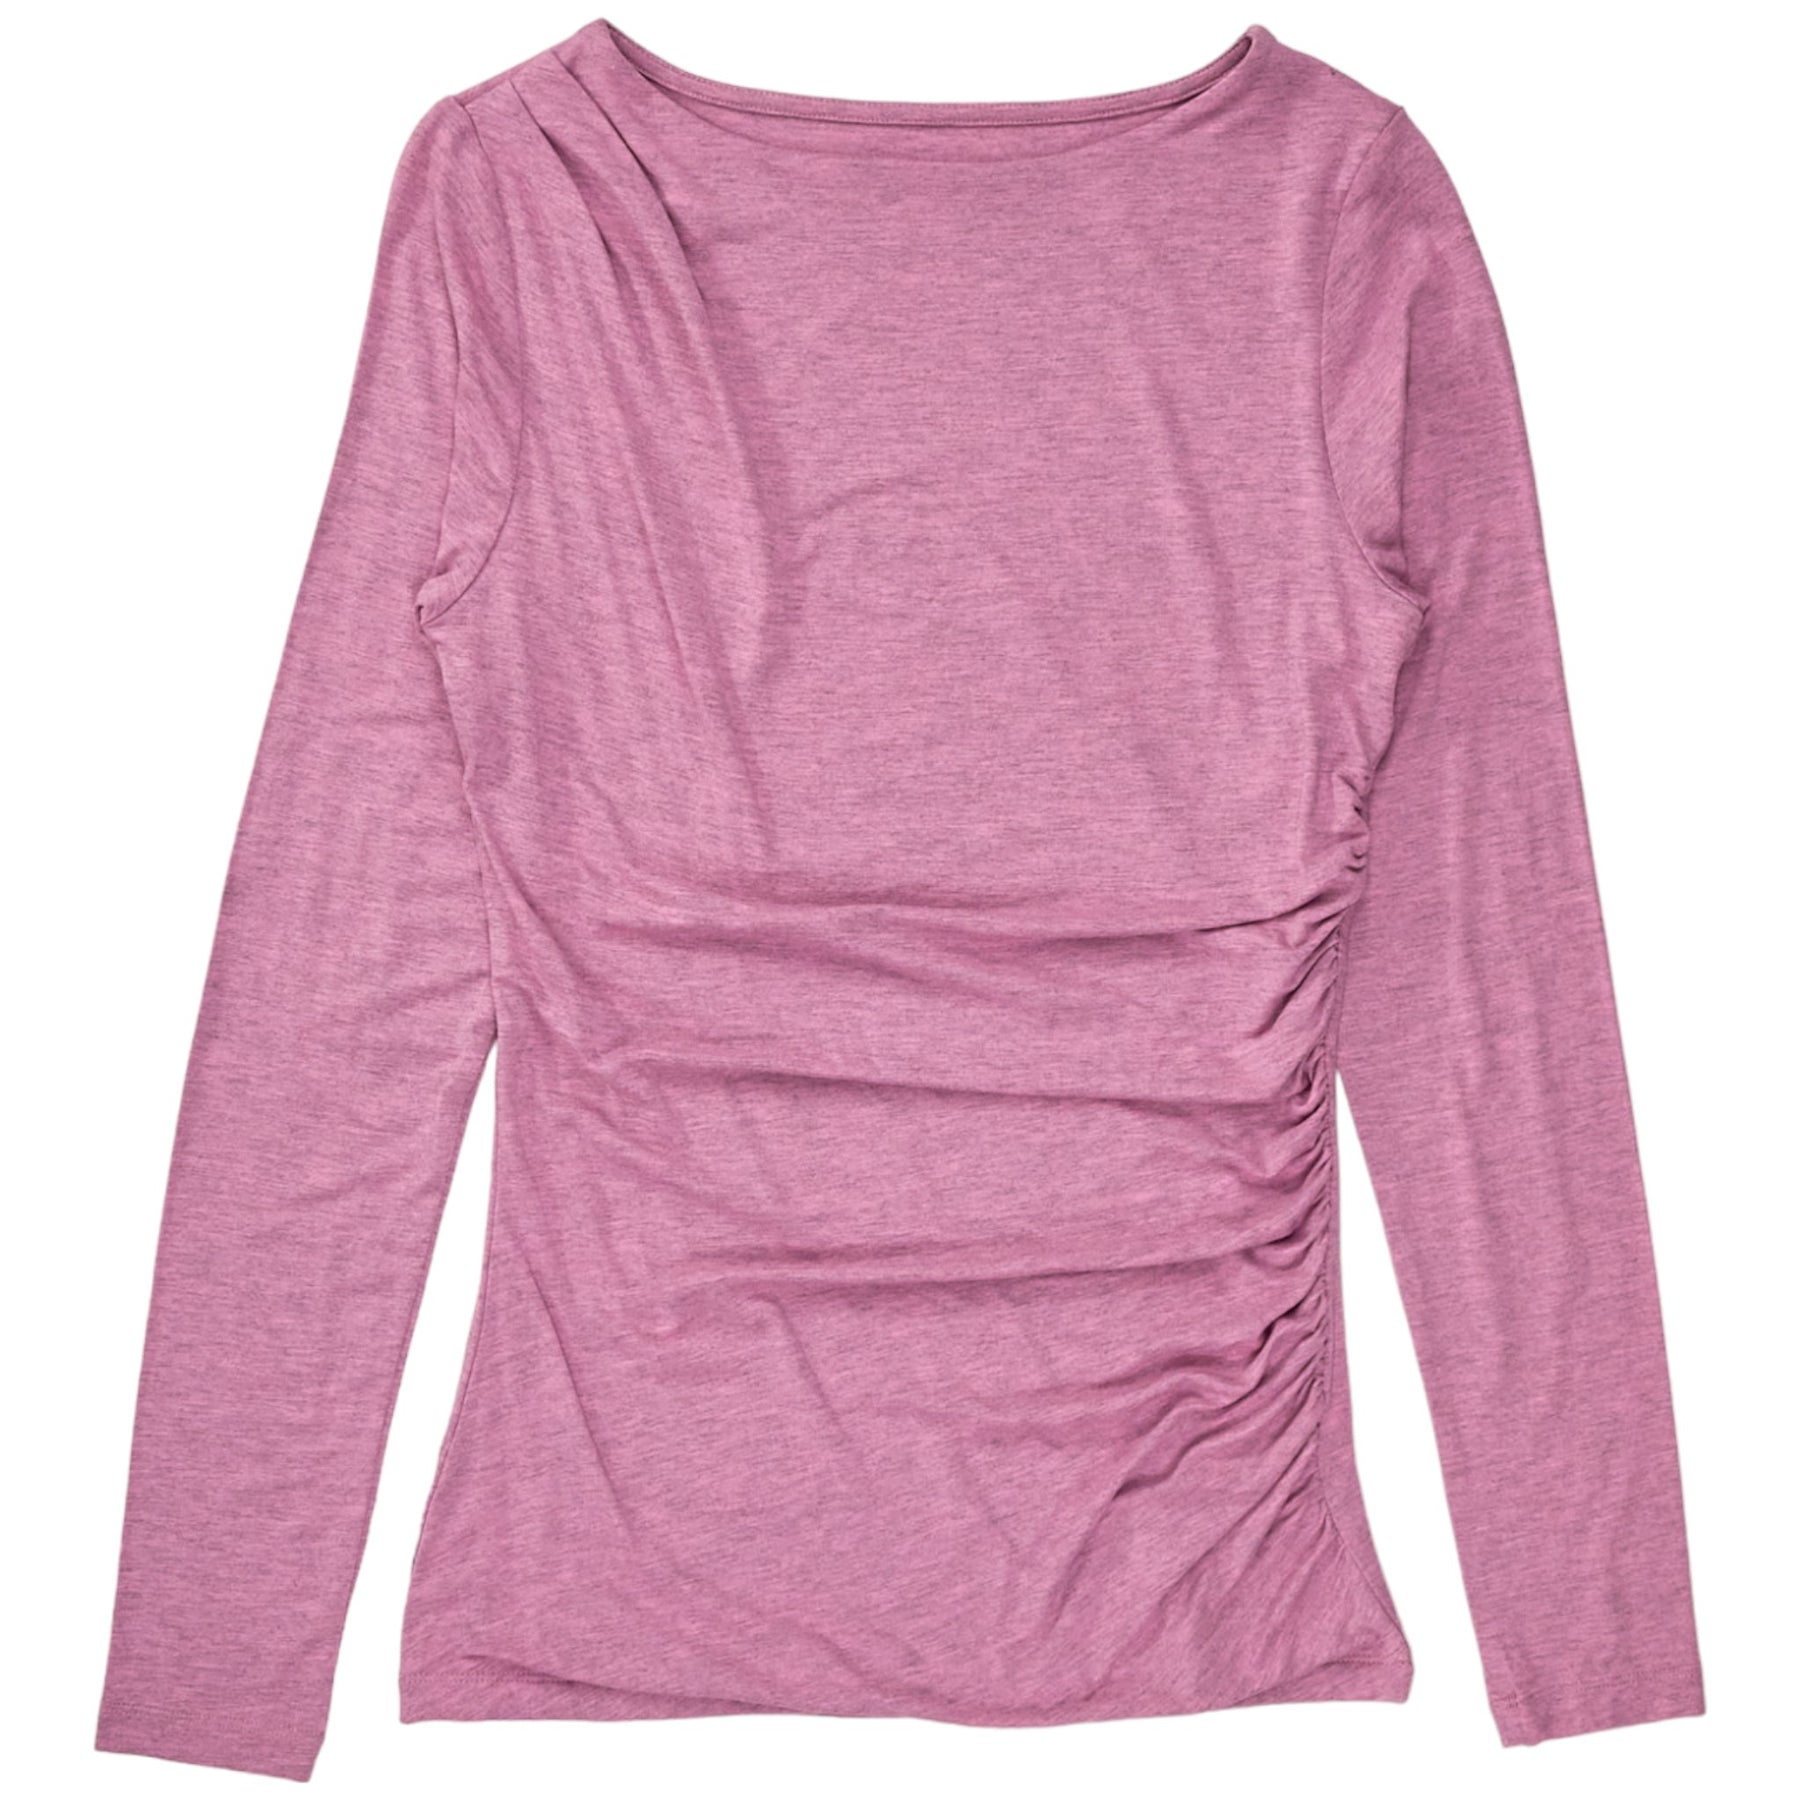 NRBY Pink/Grey Ruched Top